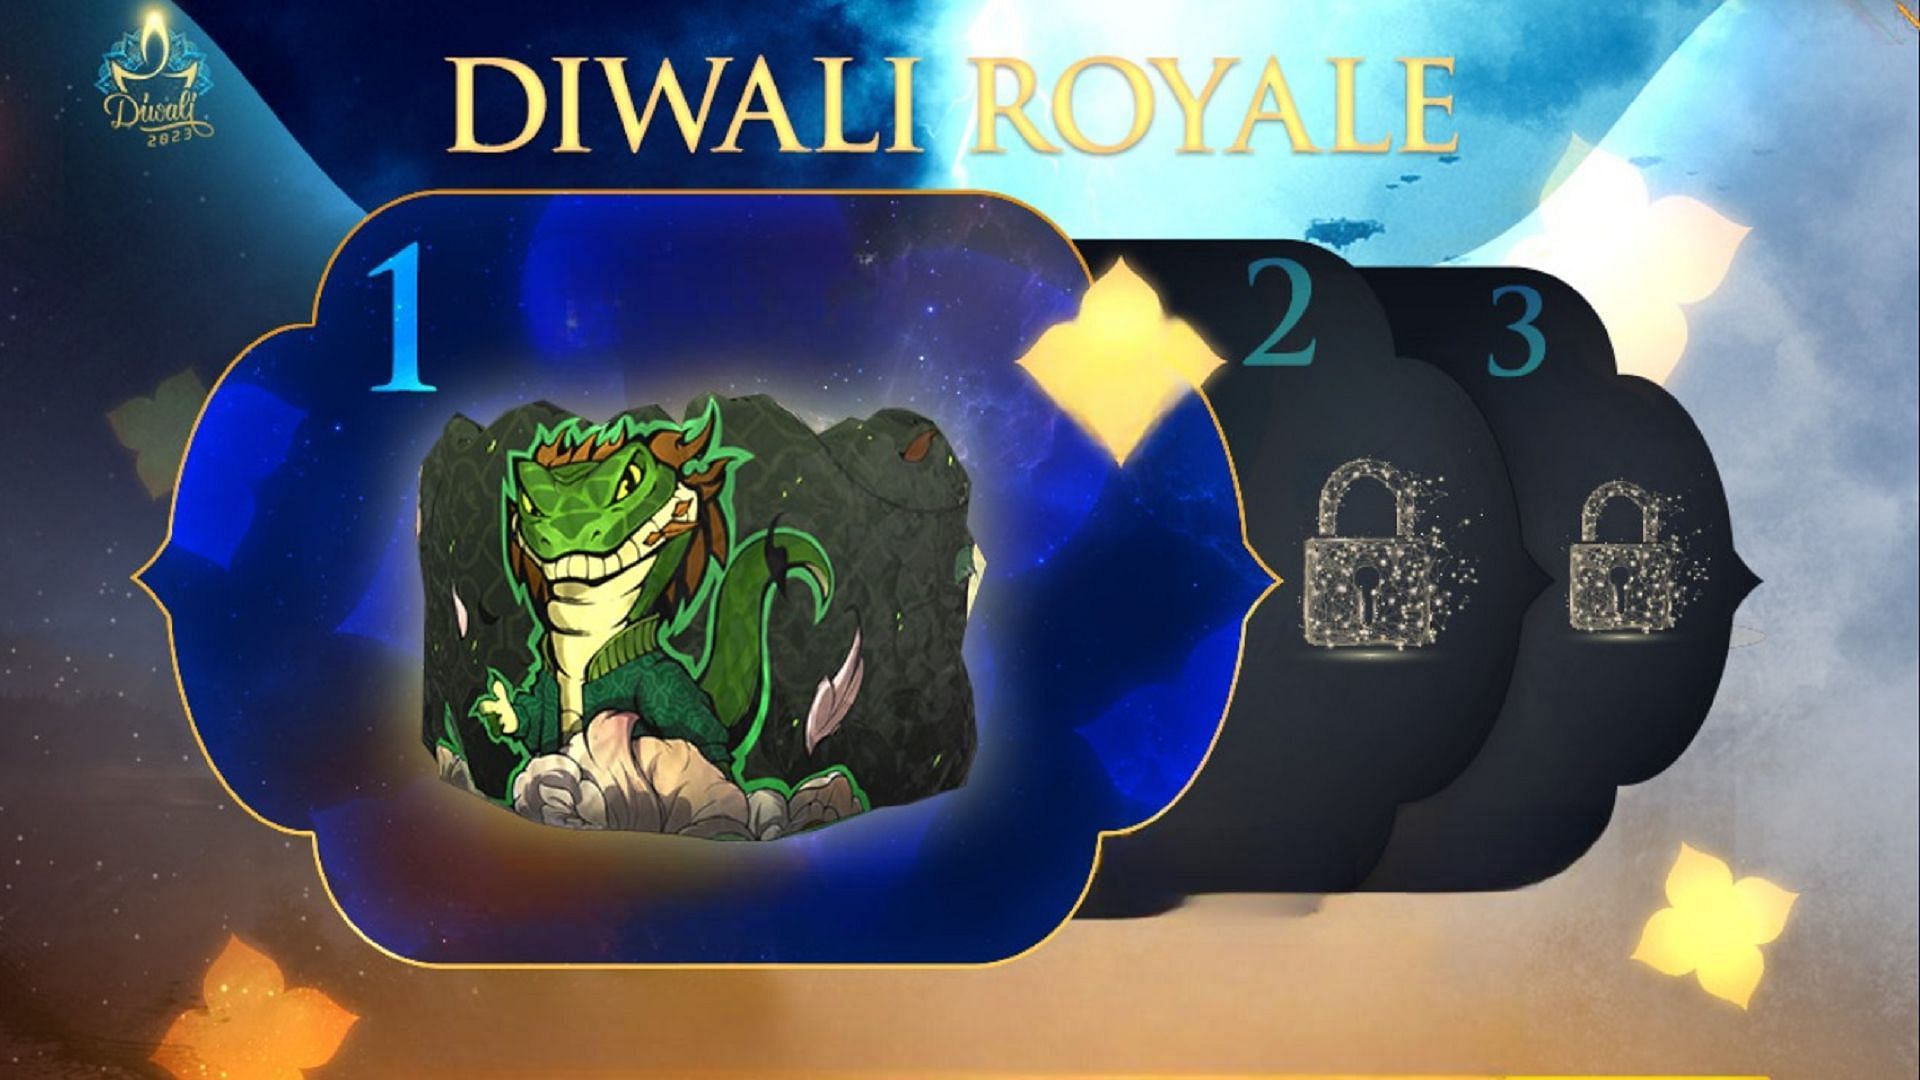 Diwali Royale is the latest event of Free Fire (Image via Garena)